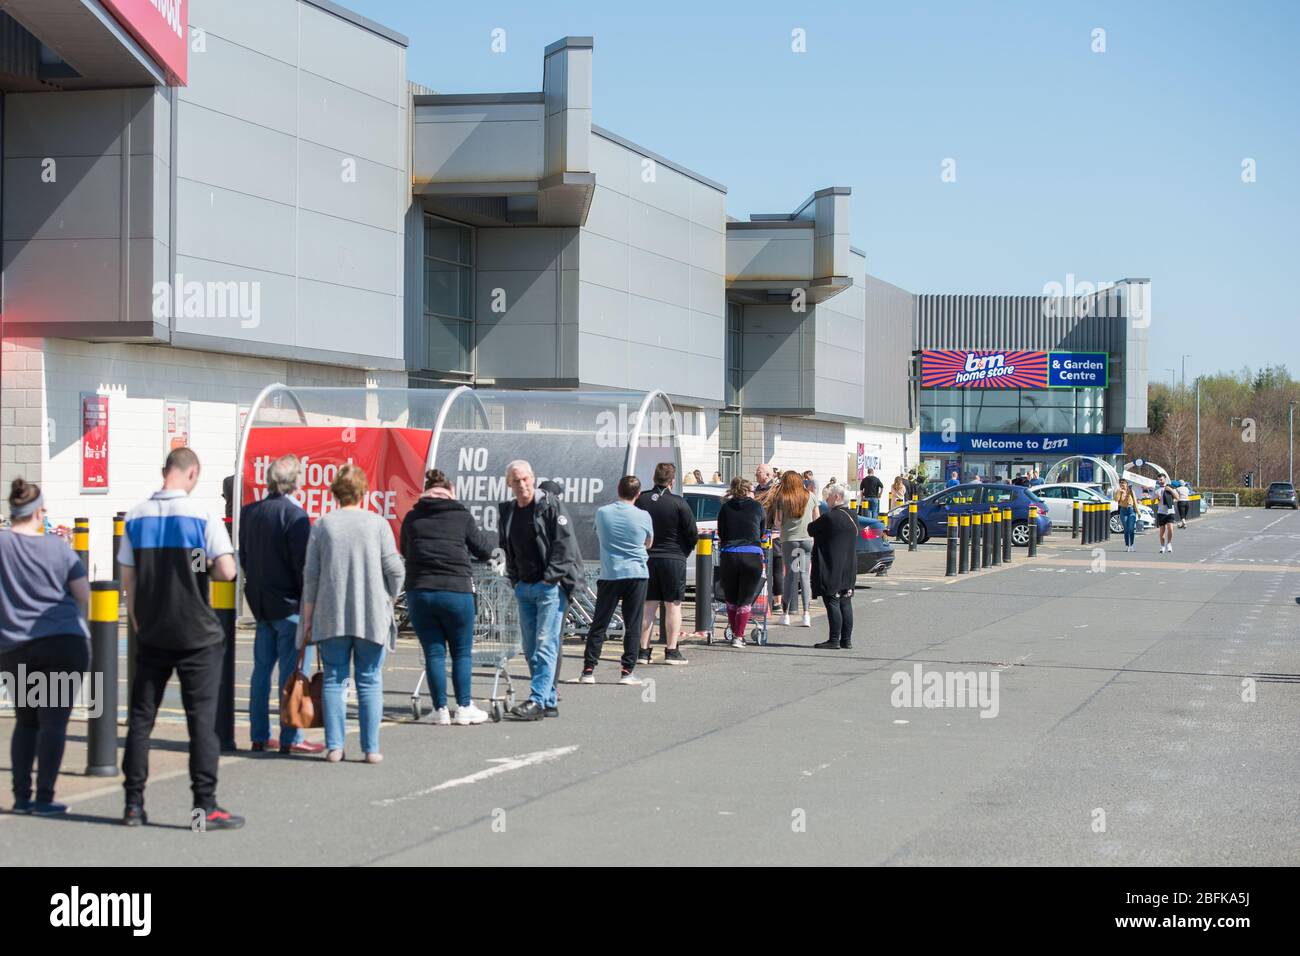 Glasgow, UK. 19th Apr, 2020. Pictured: Long lines of people wait in queues outside of B&M stores during a hot and sunny weekend under the Coronavirus (COVID-19) lockdown. Social distancing can be seen as people queue. To date in the UK confirmed cases of infected people are 120,067 with 16,060 deaths. Credit: Colin Fisher/Alamy Live News Stock Photo